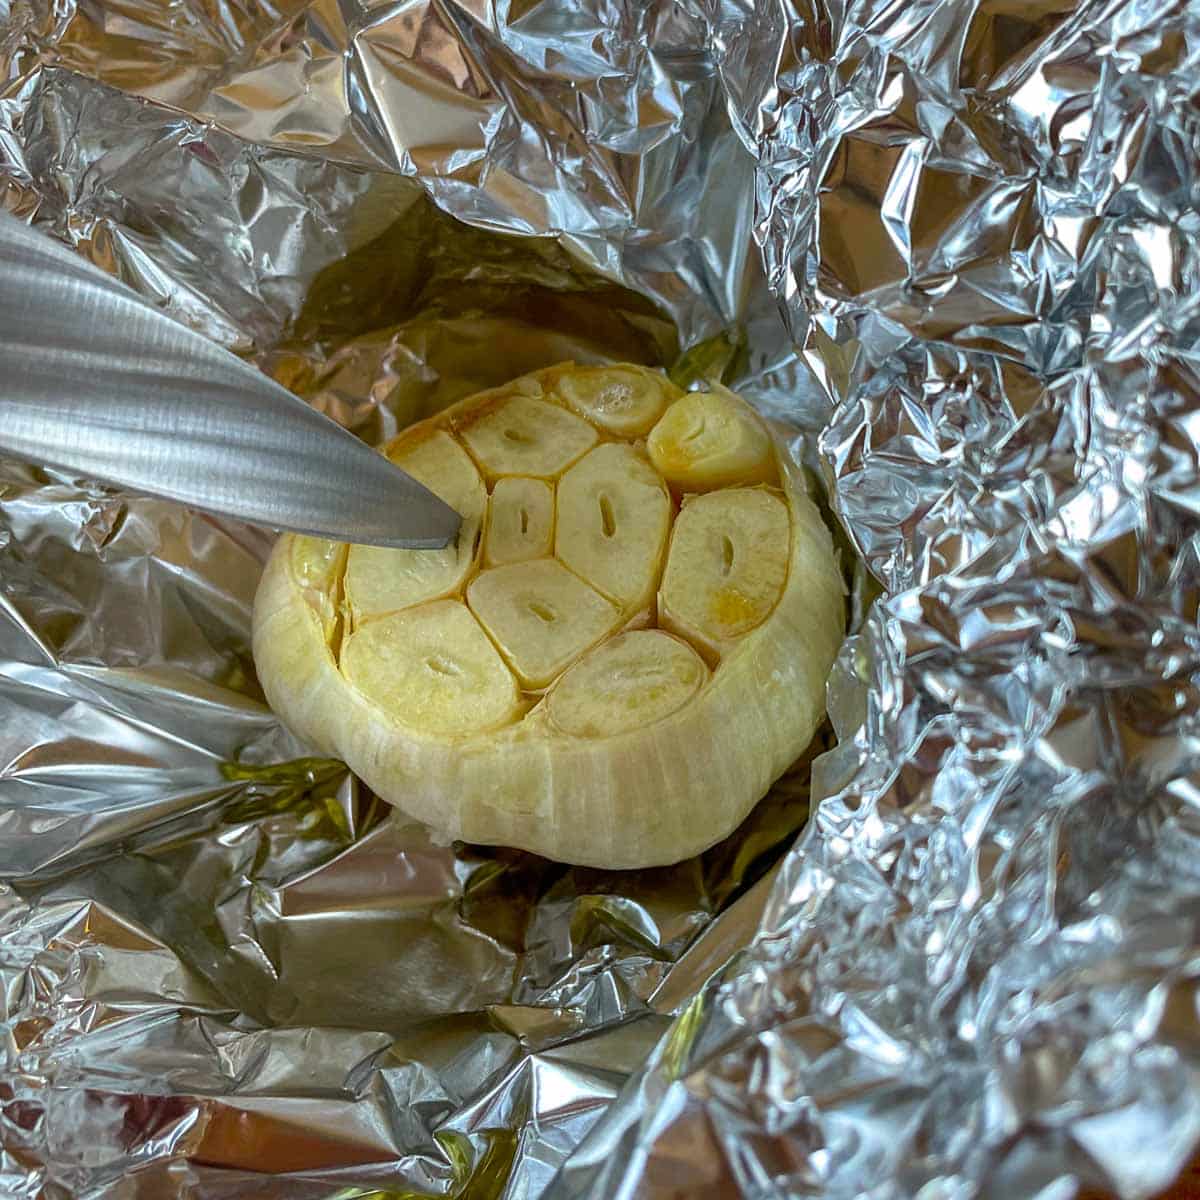 Partially roasted garlic is shown in tin foil; a paring knife is inserted into one of the cloves to test doneness.